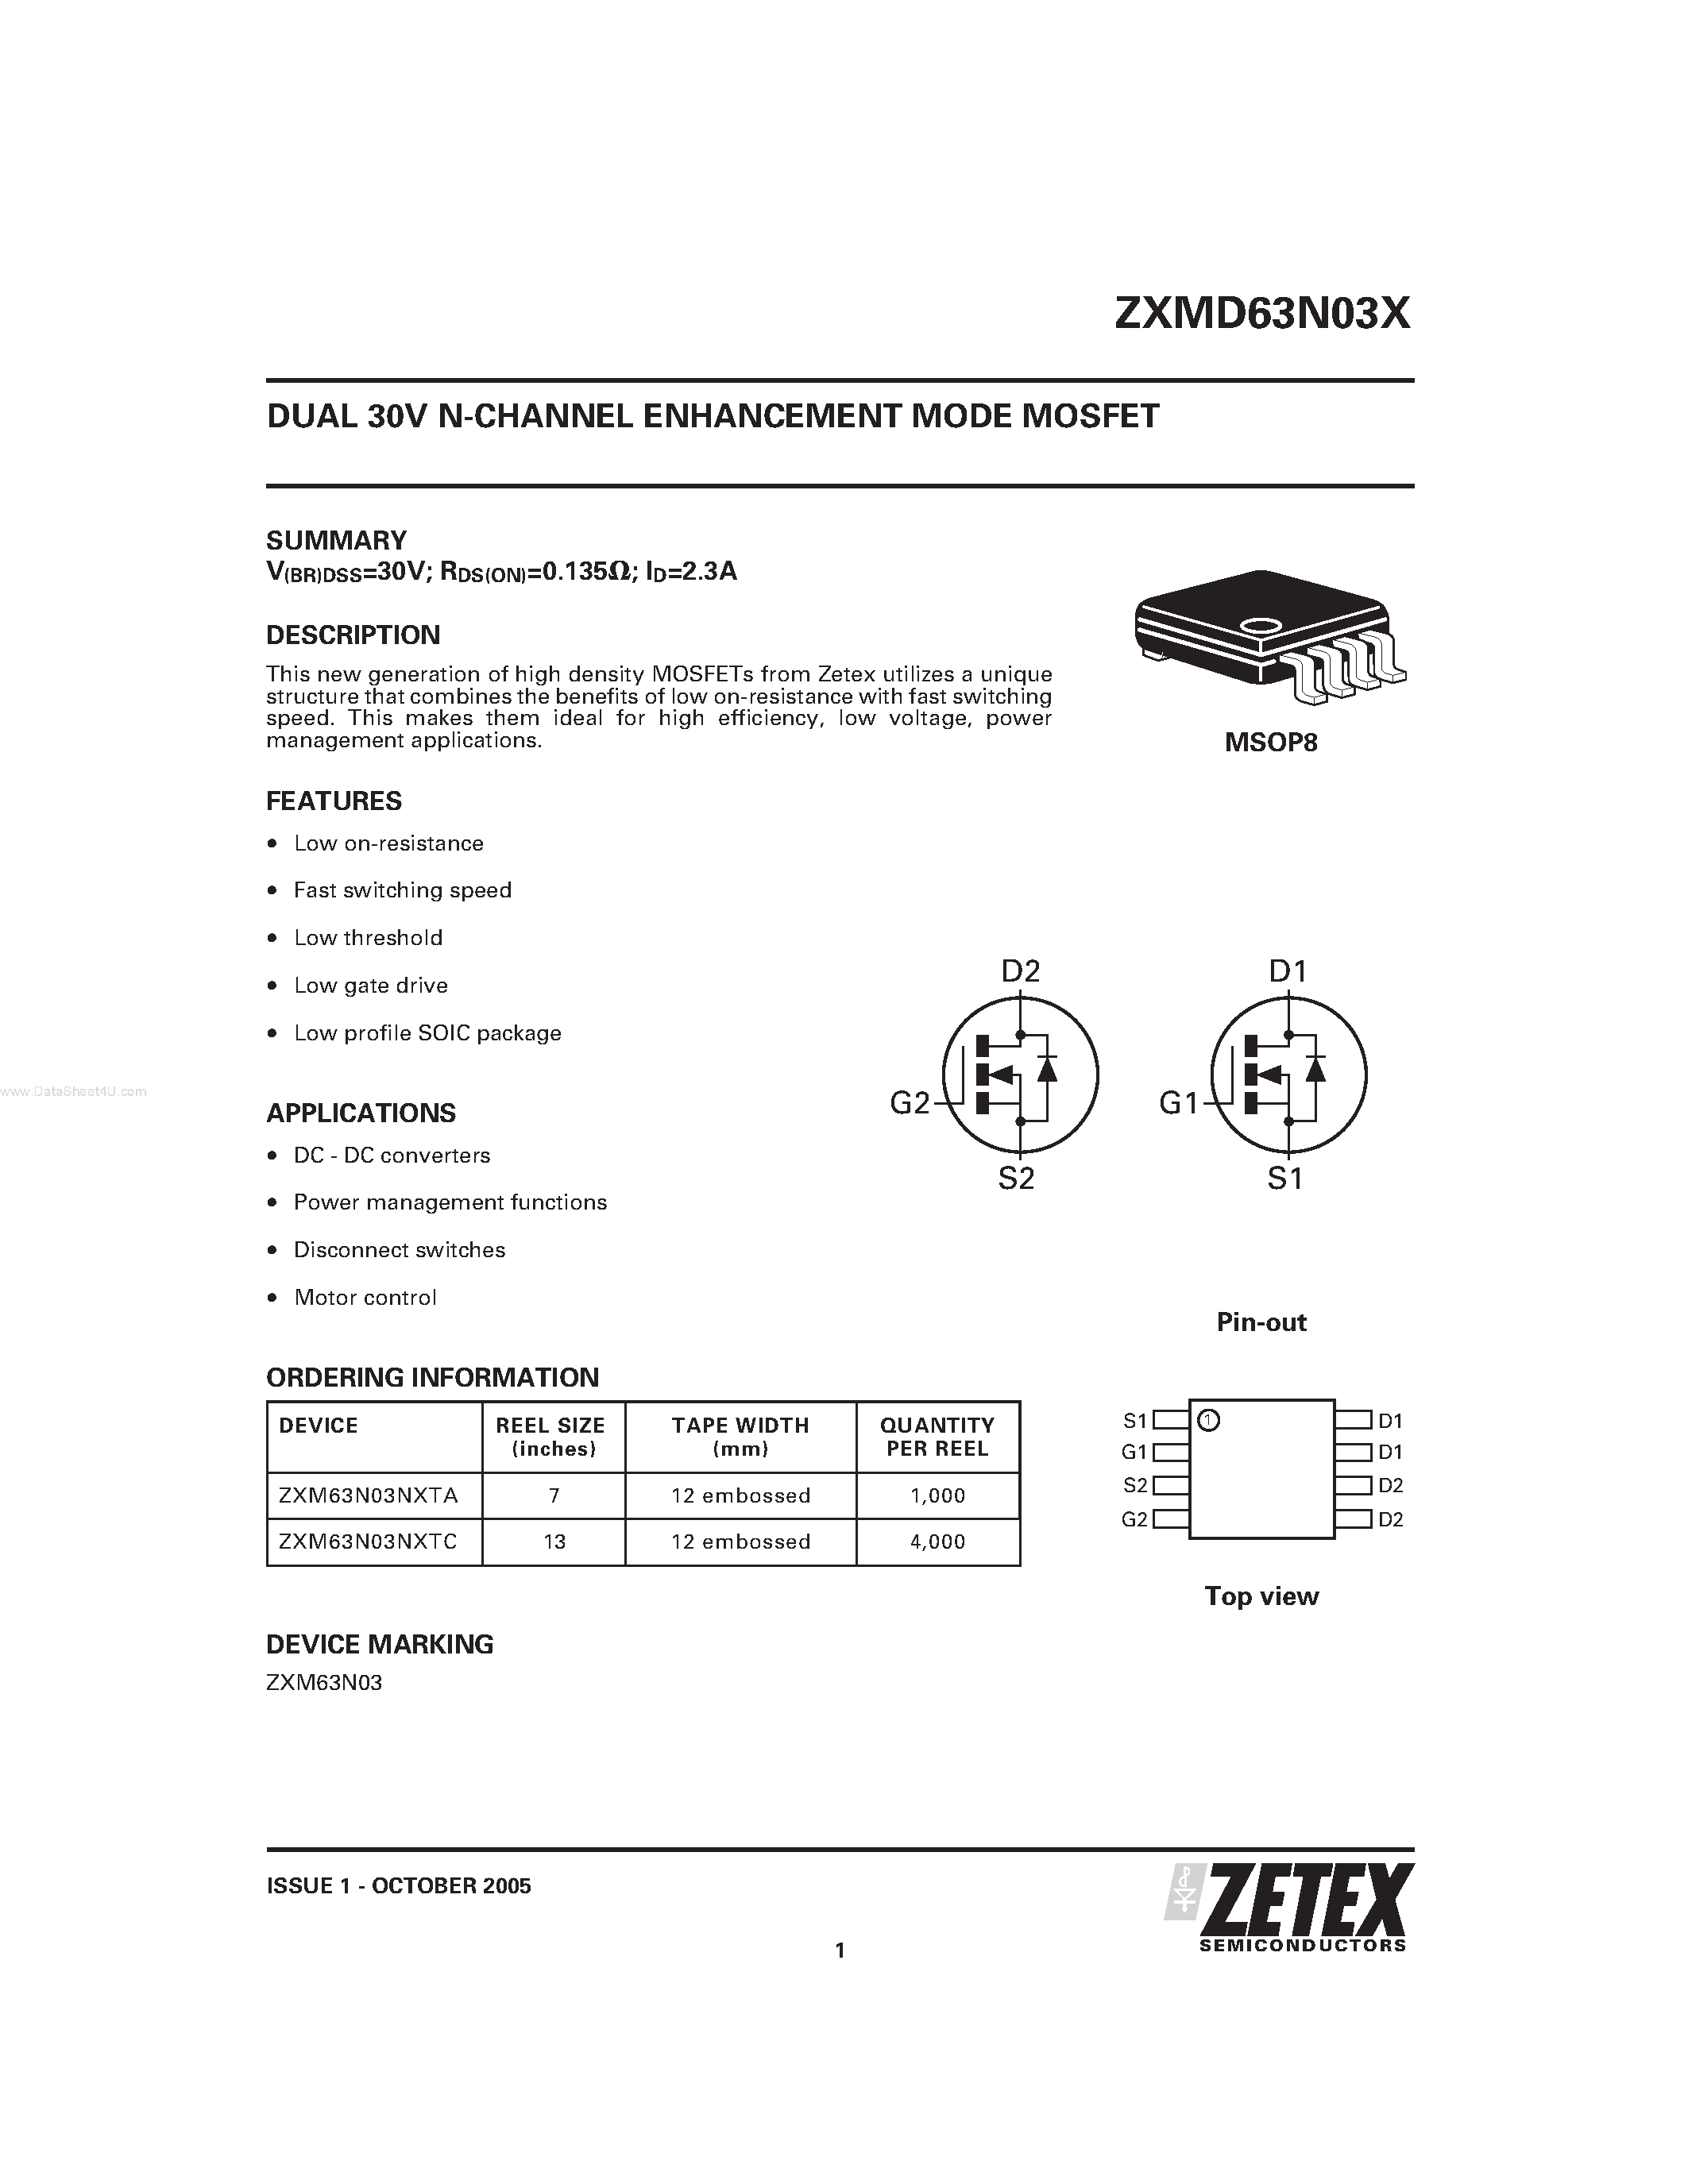 Datasheet ZXM63N03X - DUAL 30V N-CHANNEL ENHANCEMENT MODE MOSFET page 1